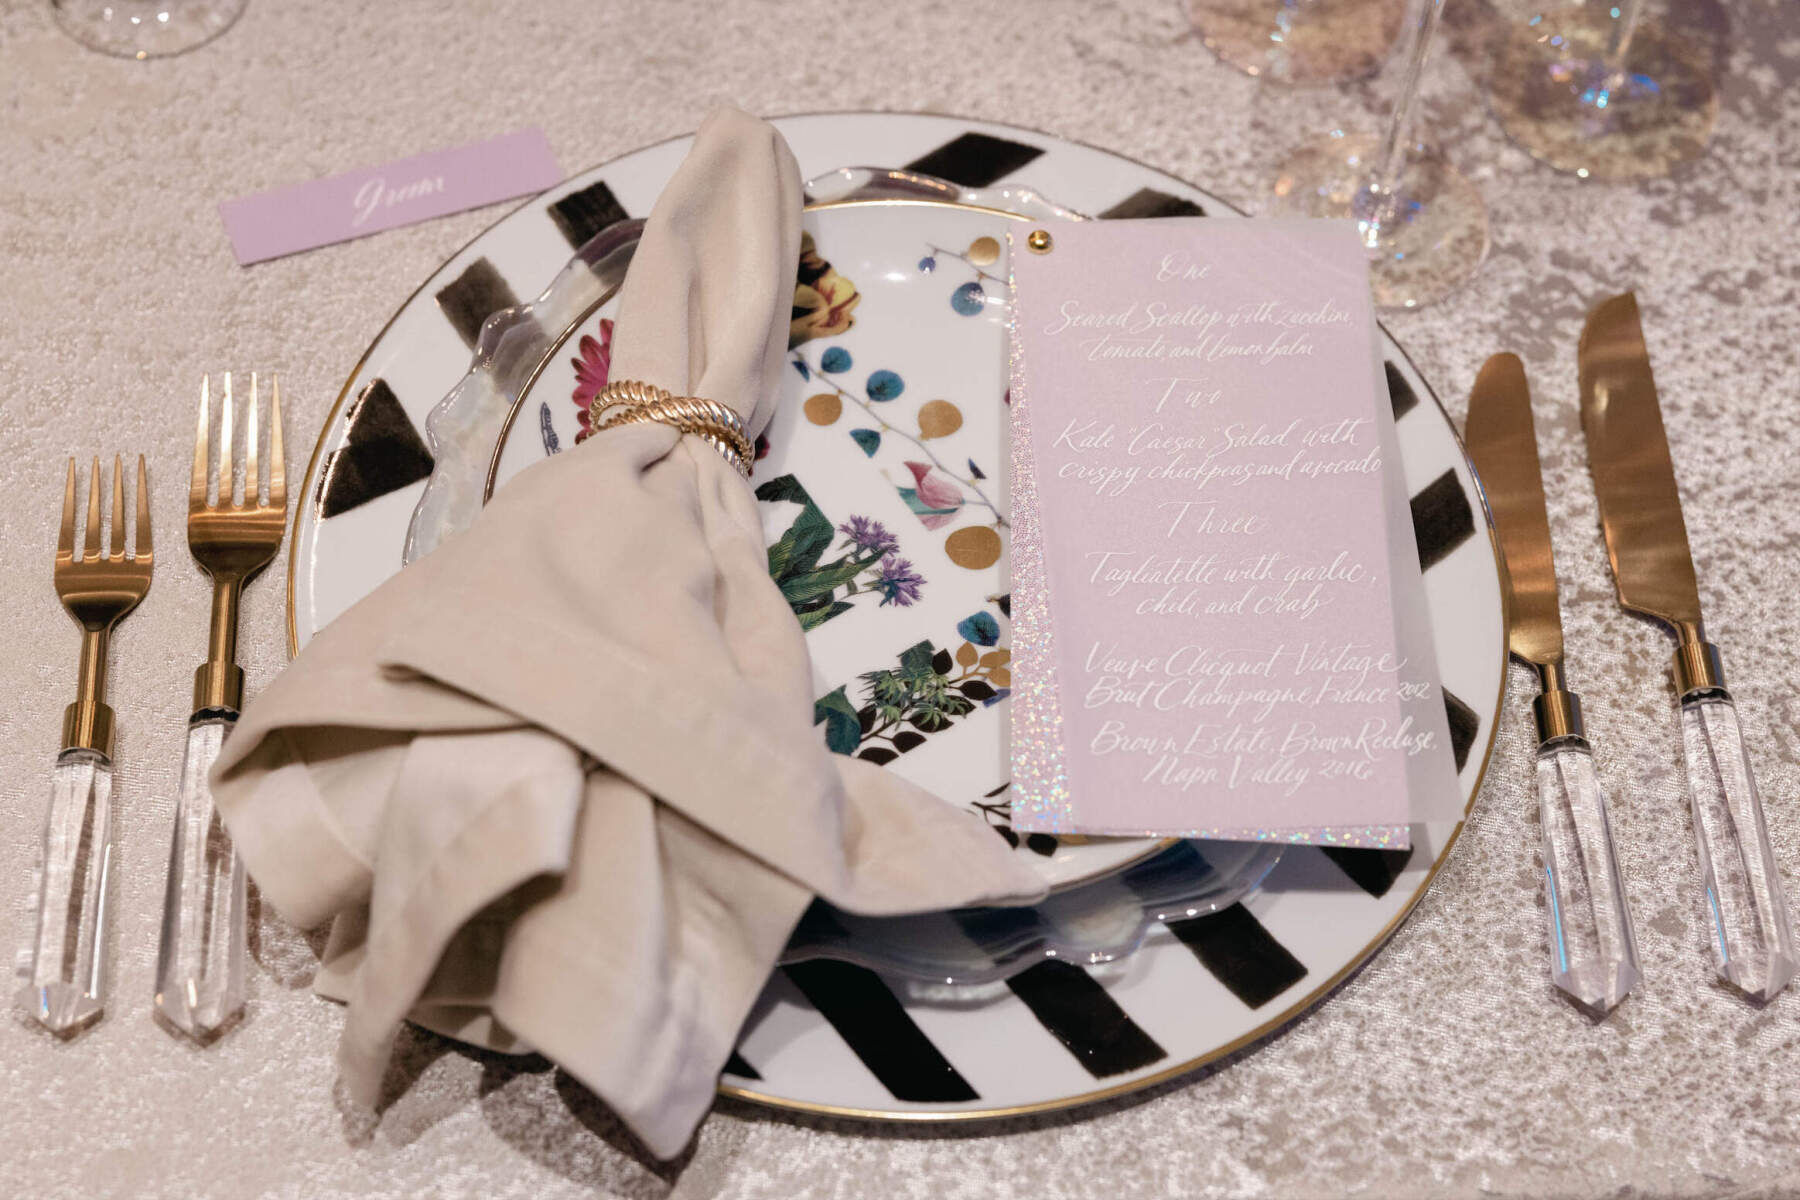 Elopement Wedding: A place-setting combining various patterned plates, clear flatware, and a menu calligraphed on vellum paper.